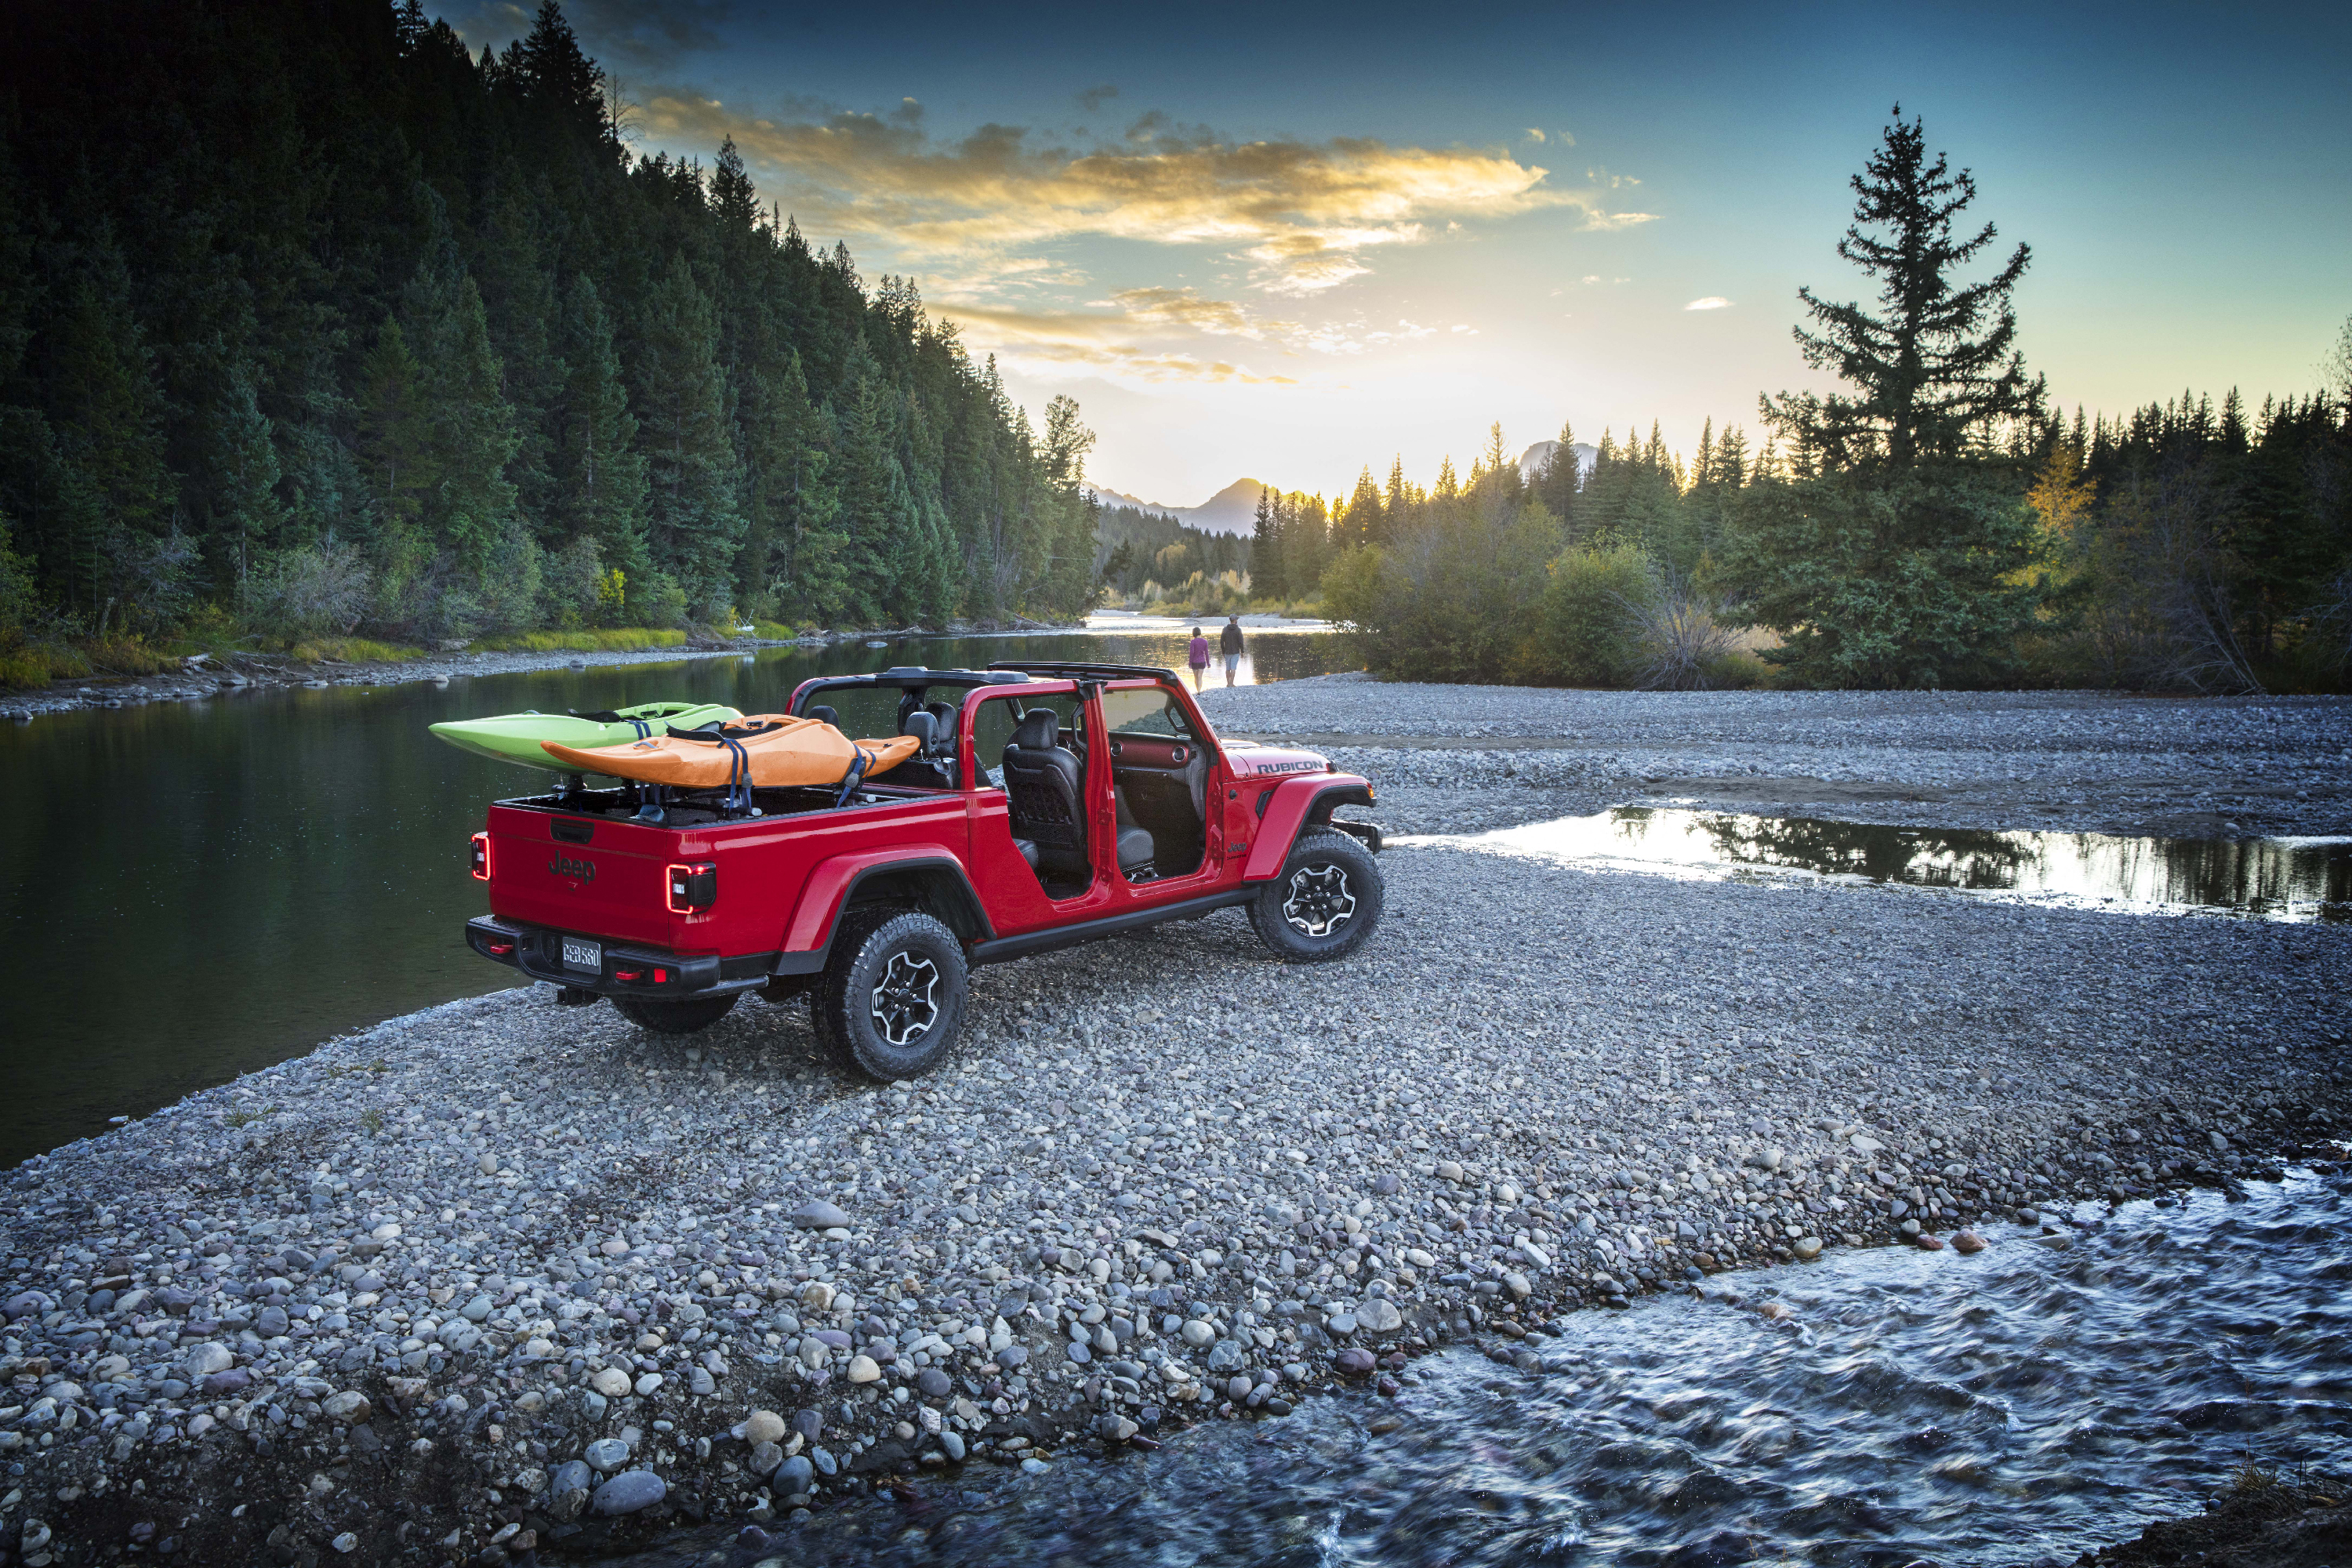 Mopar will offer more than 200 parts and accessories for the all-new 2020 Jeep® Gladiator, including kayak carriers